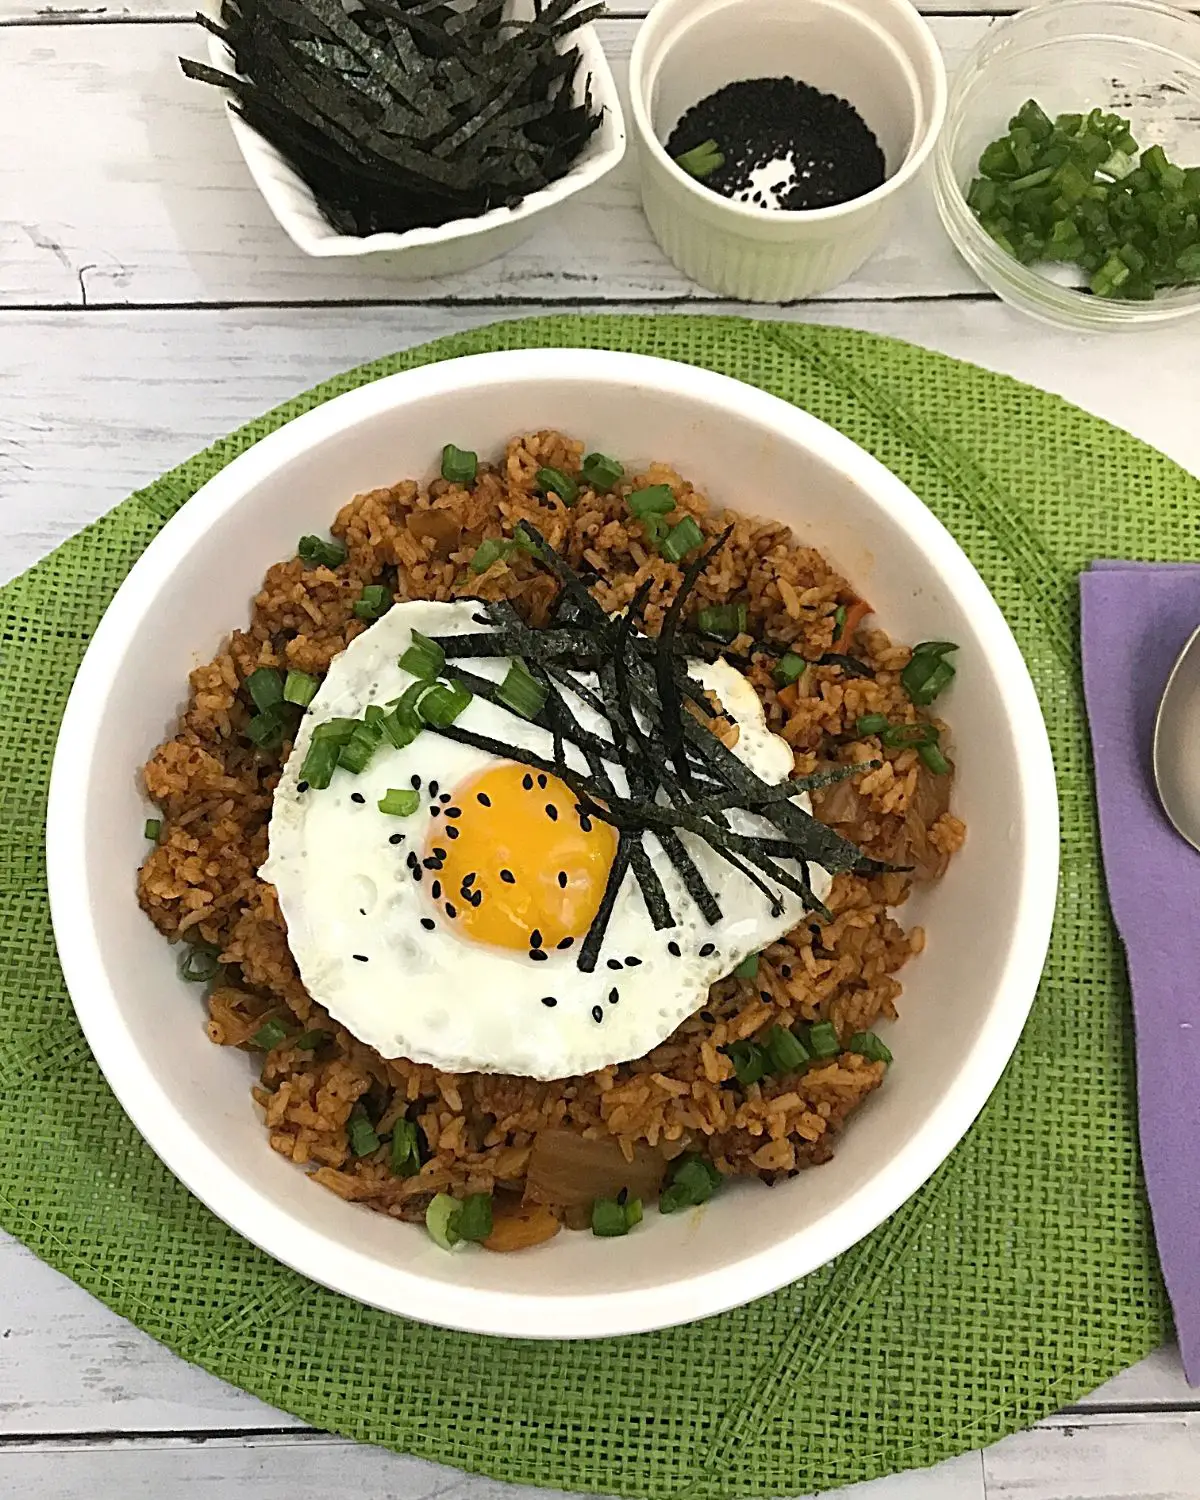 Kimchic fried rice served in a white large plate with some garnishing 